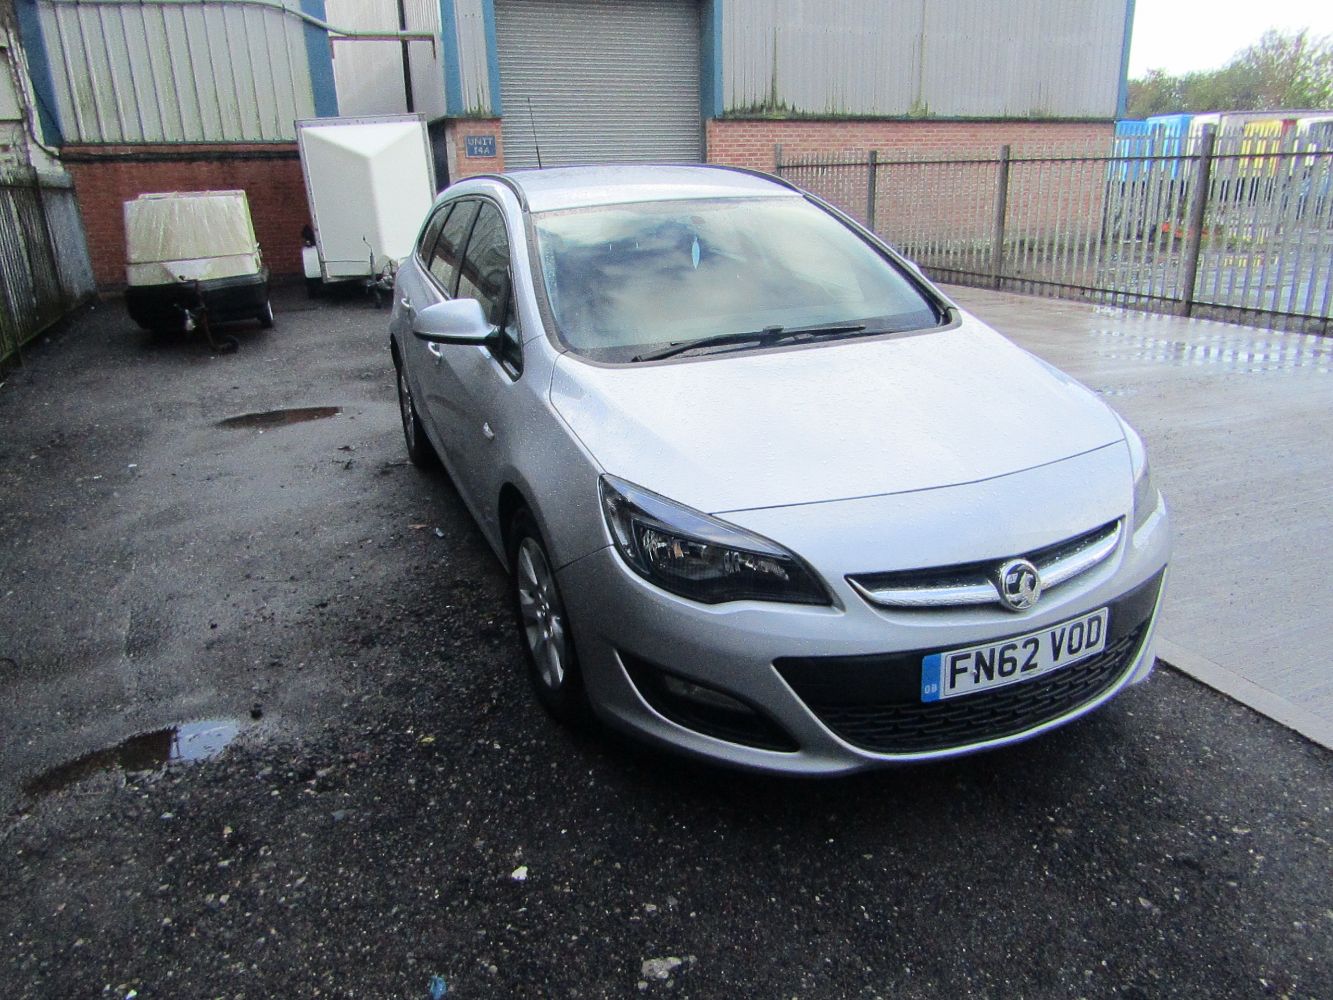 Vauxhall Astra Estate, Special 10% buyers Premium with new lower reserve